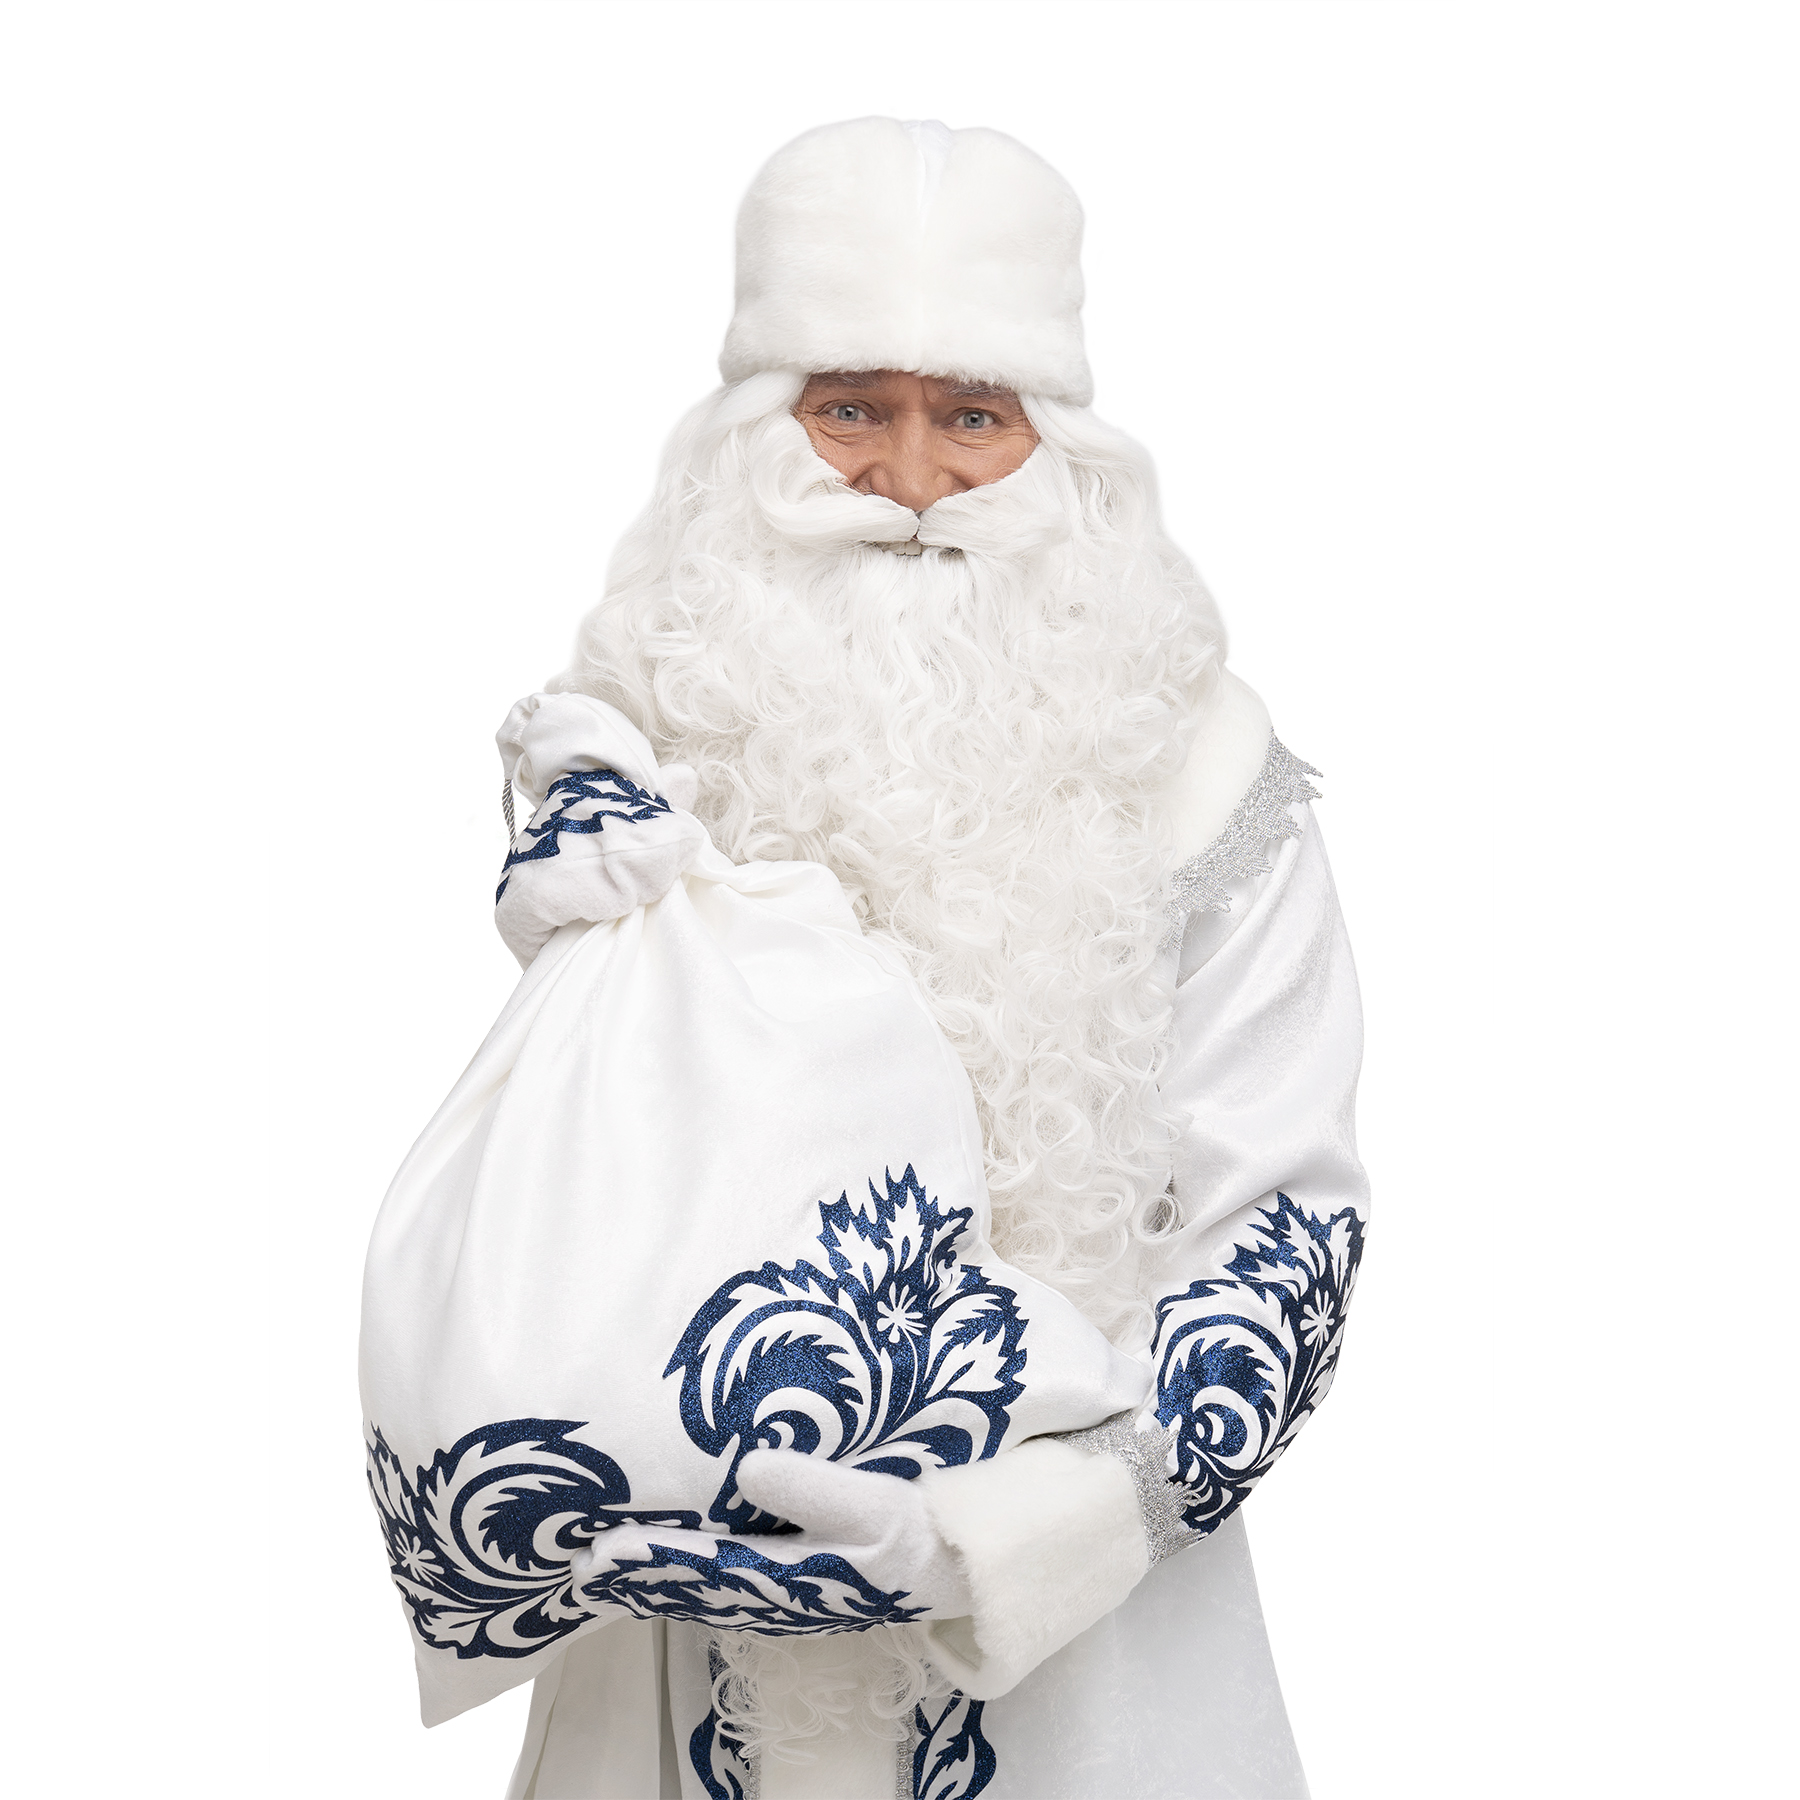 Father Frost Costume North